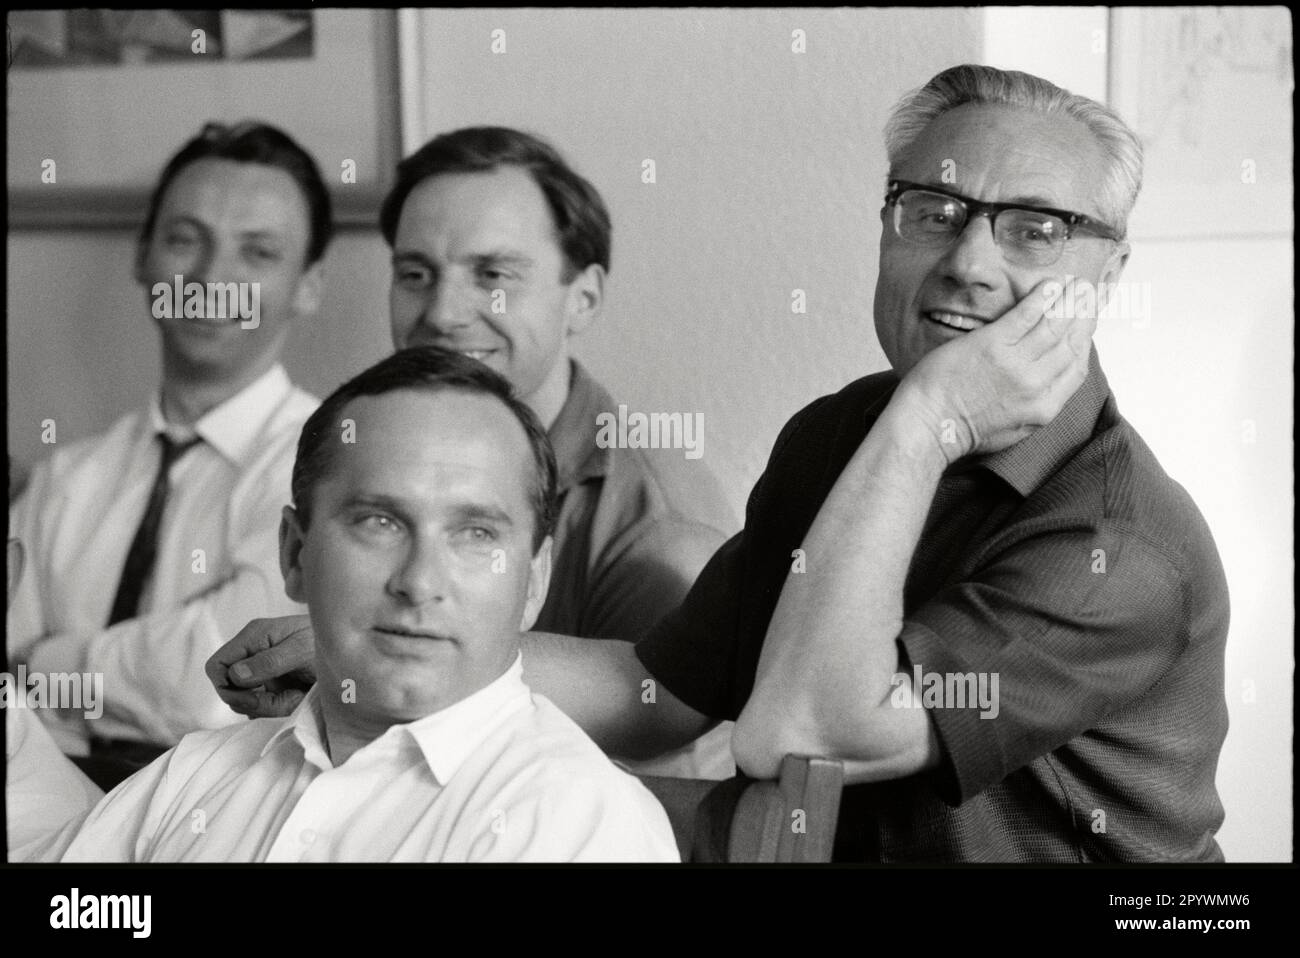 Germany. Hamburg. 1964. Architecture critic Manfred Sack with historian Karl-Heinz Janssen and political editor Hans Gresmann and publisher Gerd Bucerius. Conference of the editorial staff of the weekly newspaper Die Zeit. M-GE-ZEI-017 Copyright Notice: Max Scheler/SZ Photo. Stock Photo